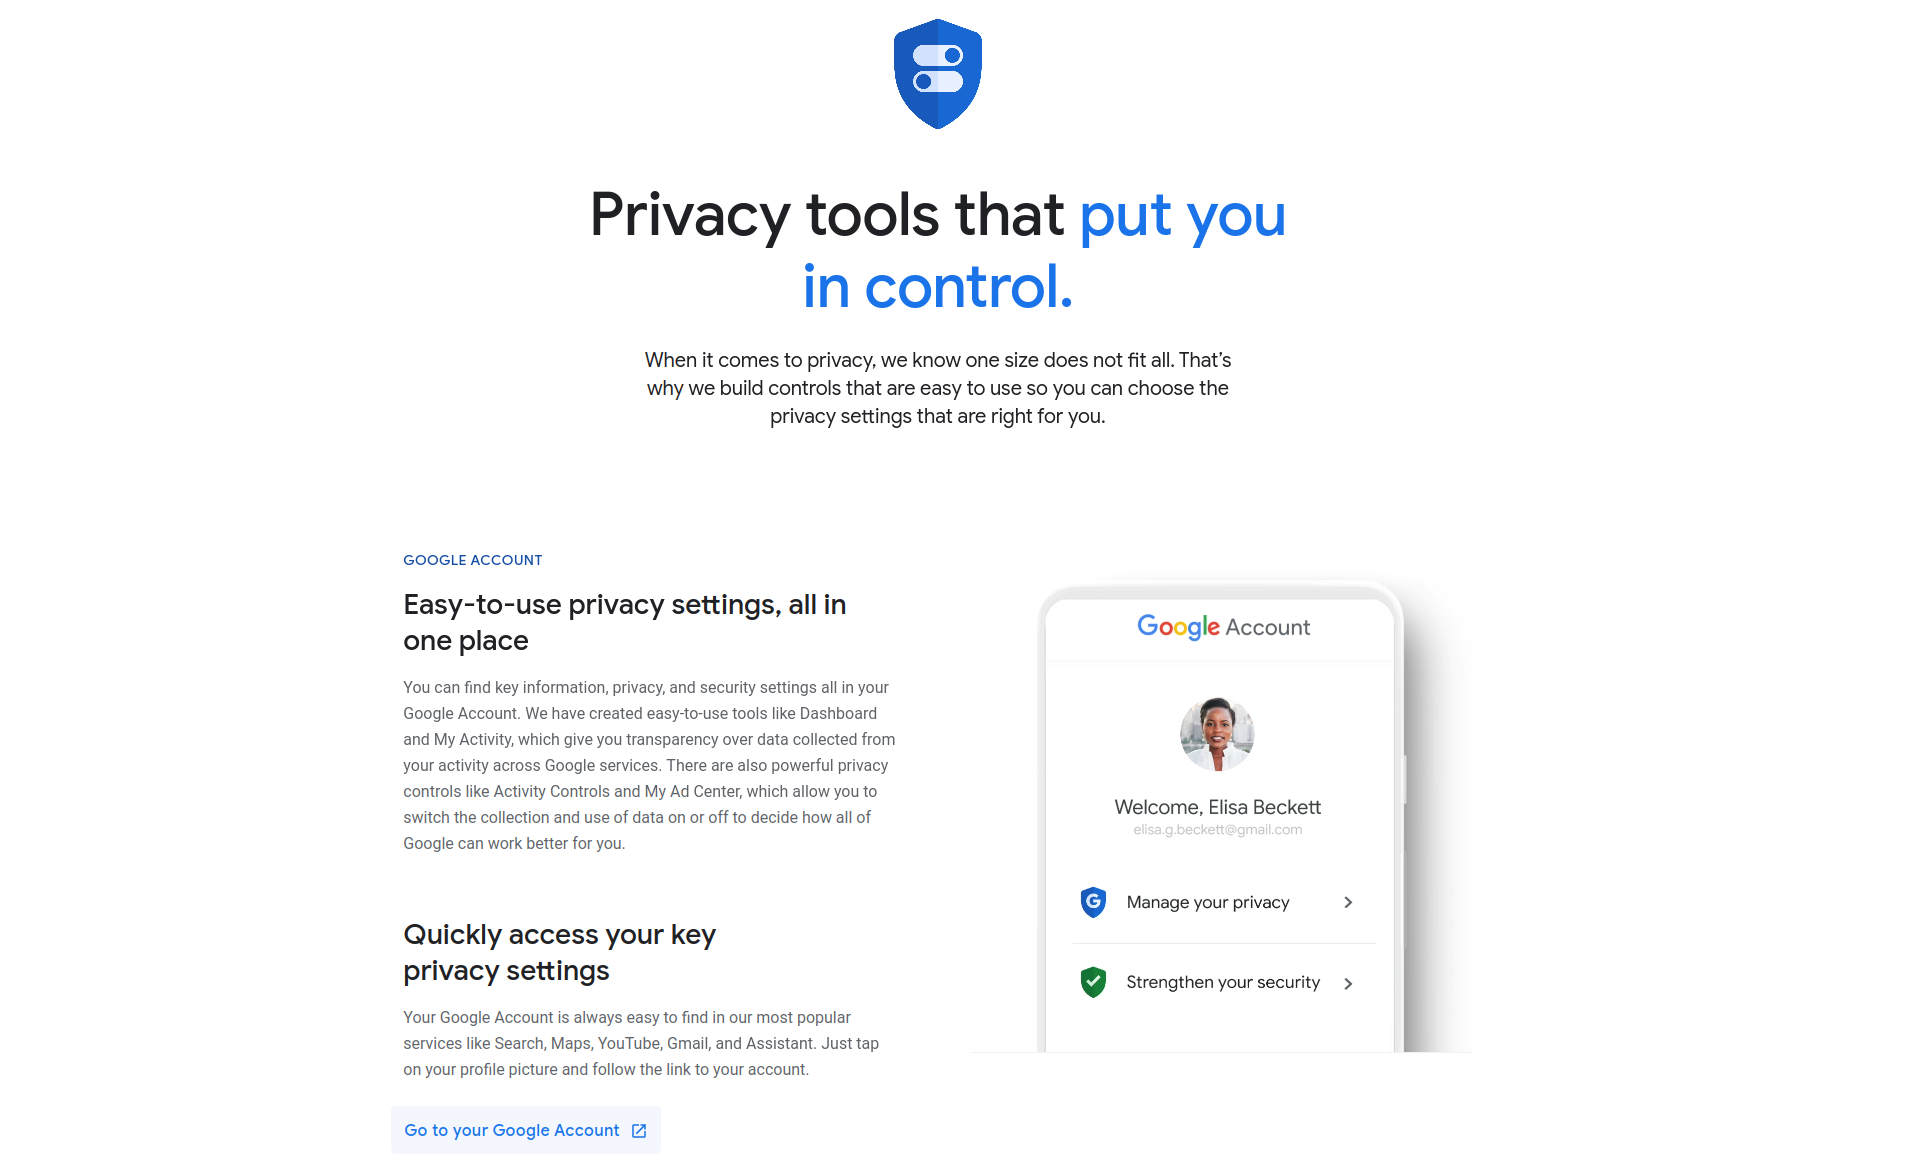 Google’s Privacy tools